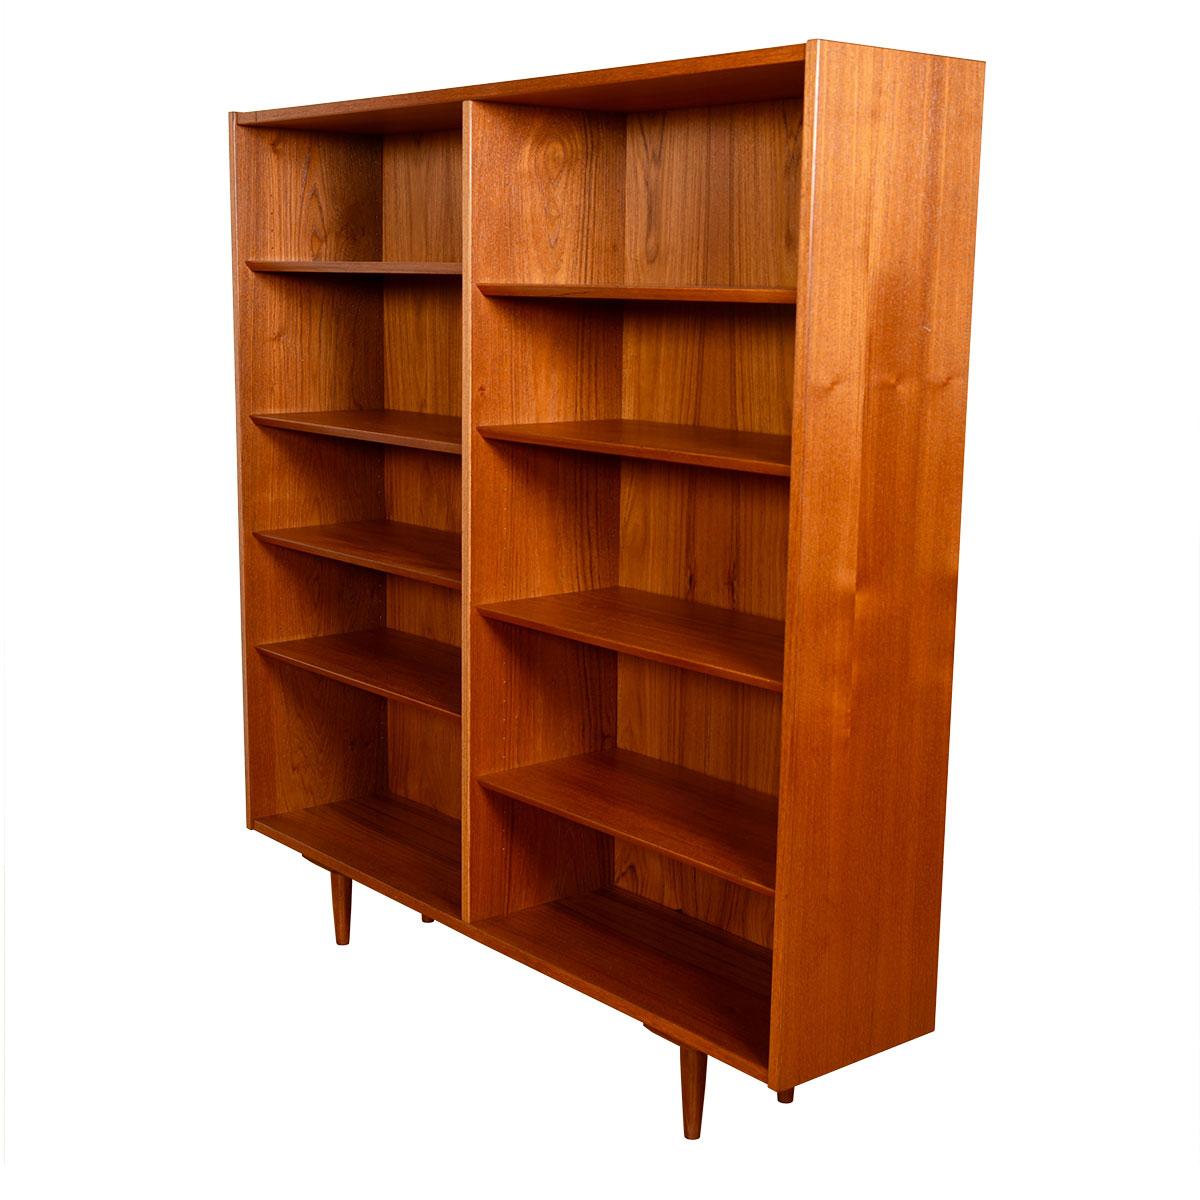 Stunning Danish Modern bookcase.
Rich walnut figuring and tones of the wood make a gorgeous backdrop to any display.
The double bookcase has adjustable beveled shelves throughout.
The overall styling is straightforward putting the emphasis on its